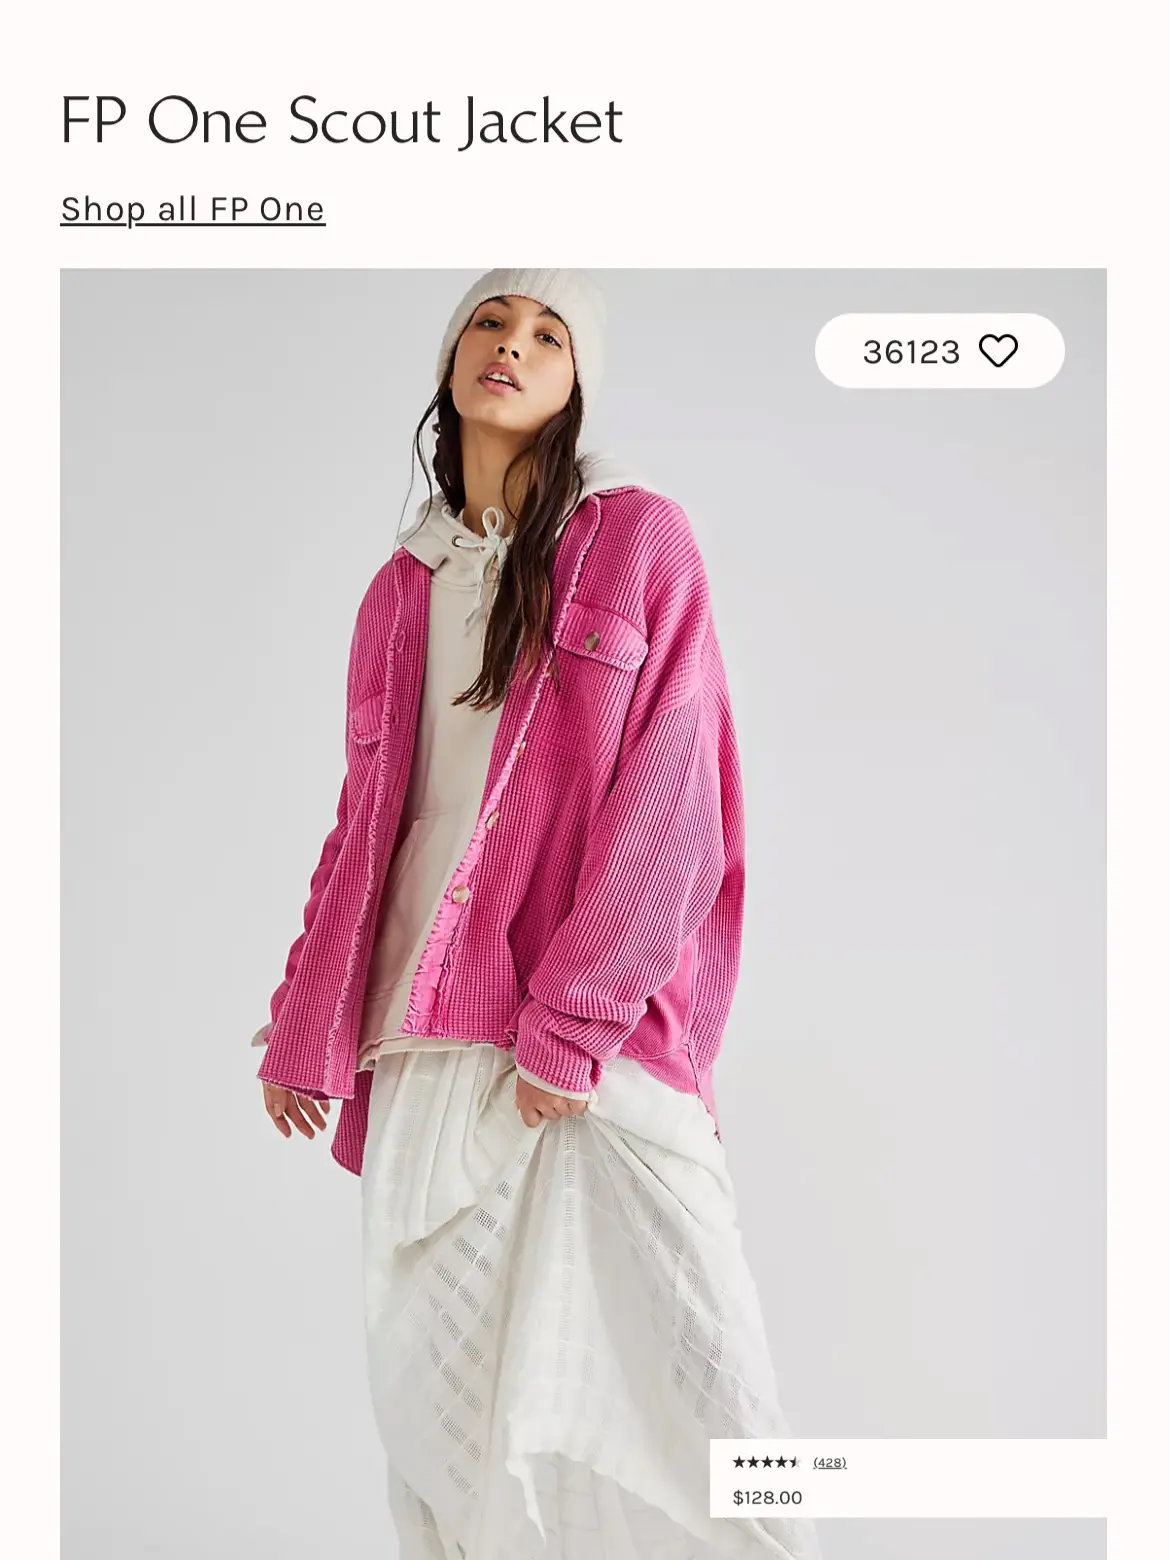 This Free People FP One Scout Jacket Is A Best Seller